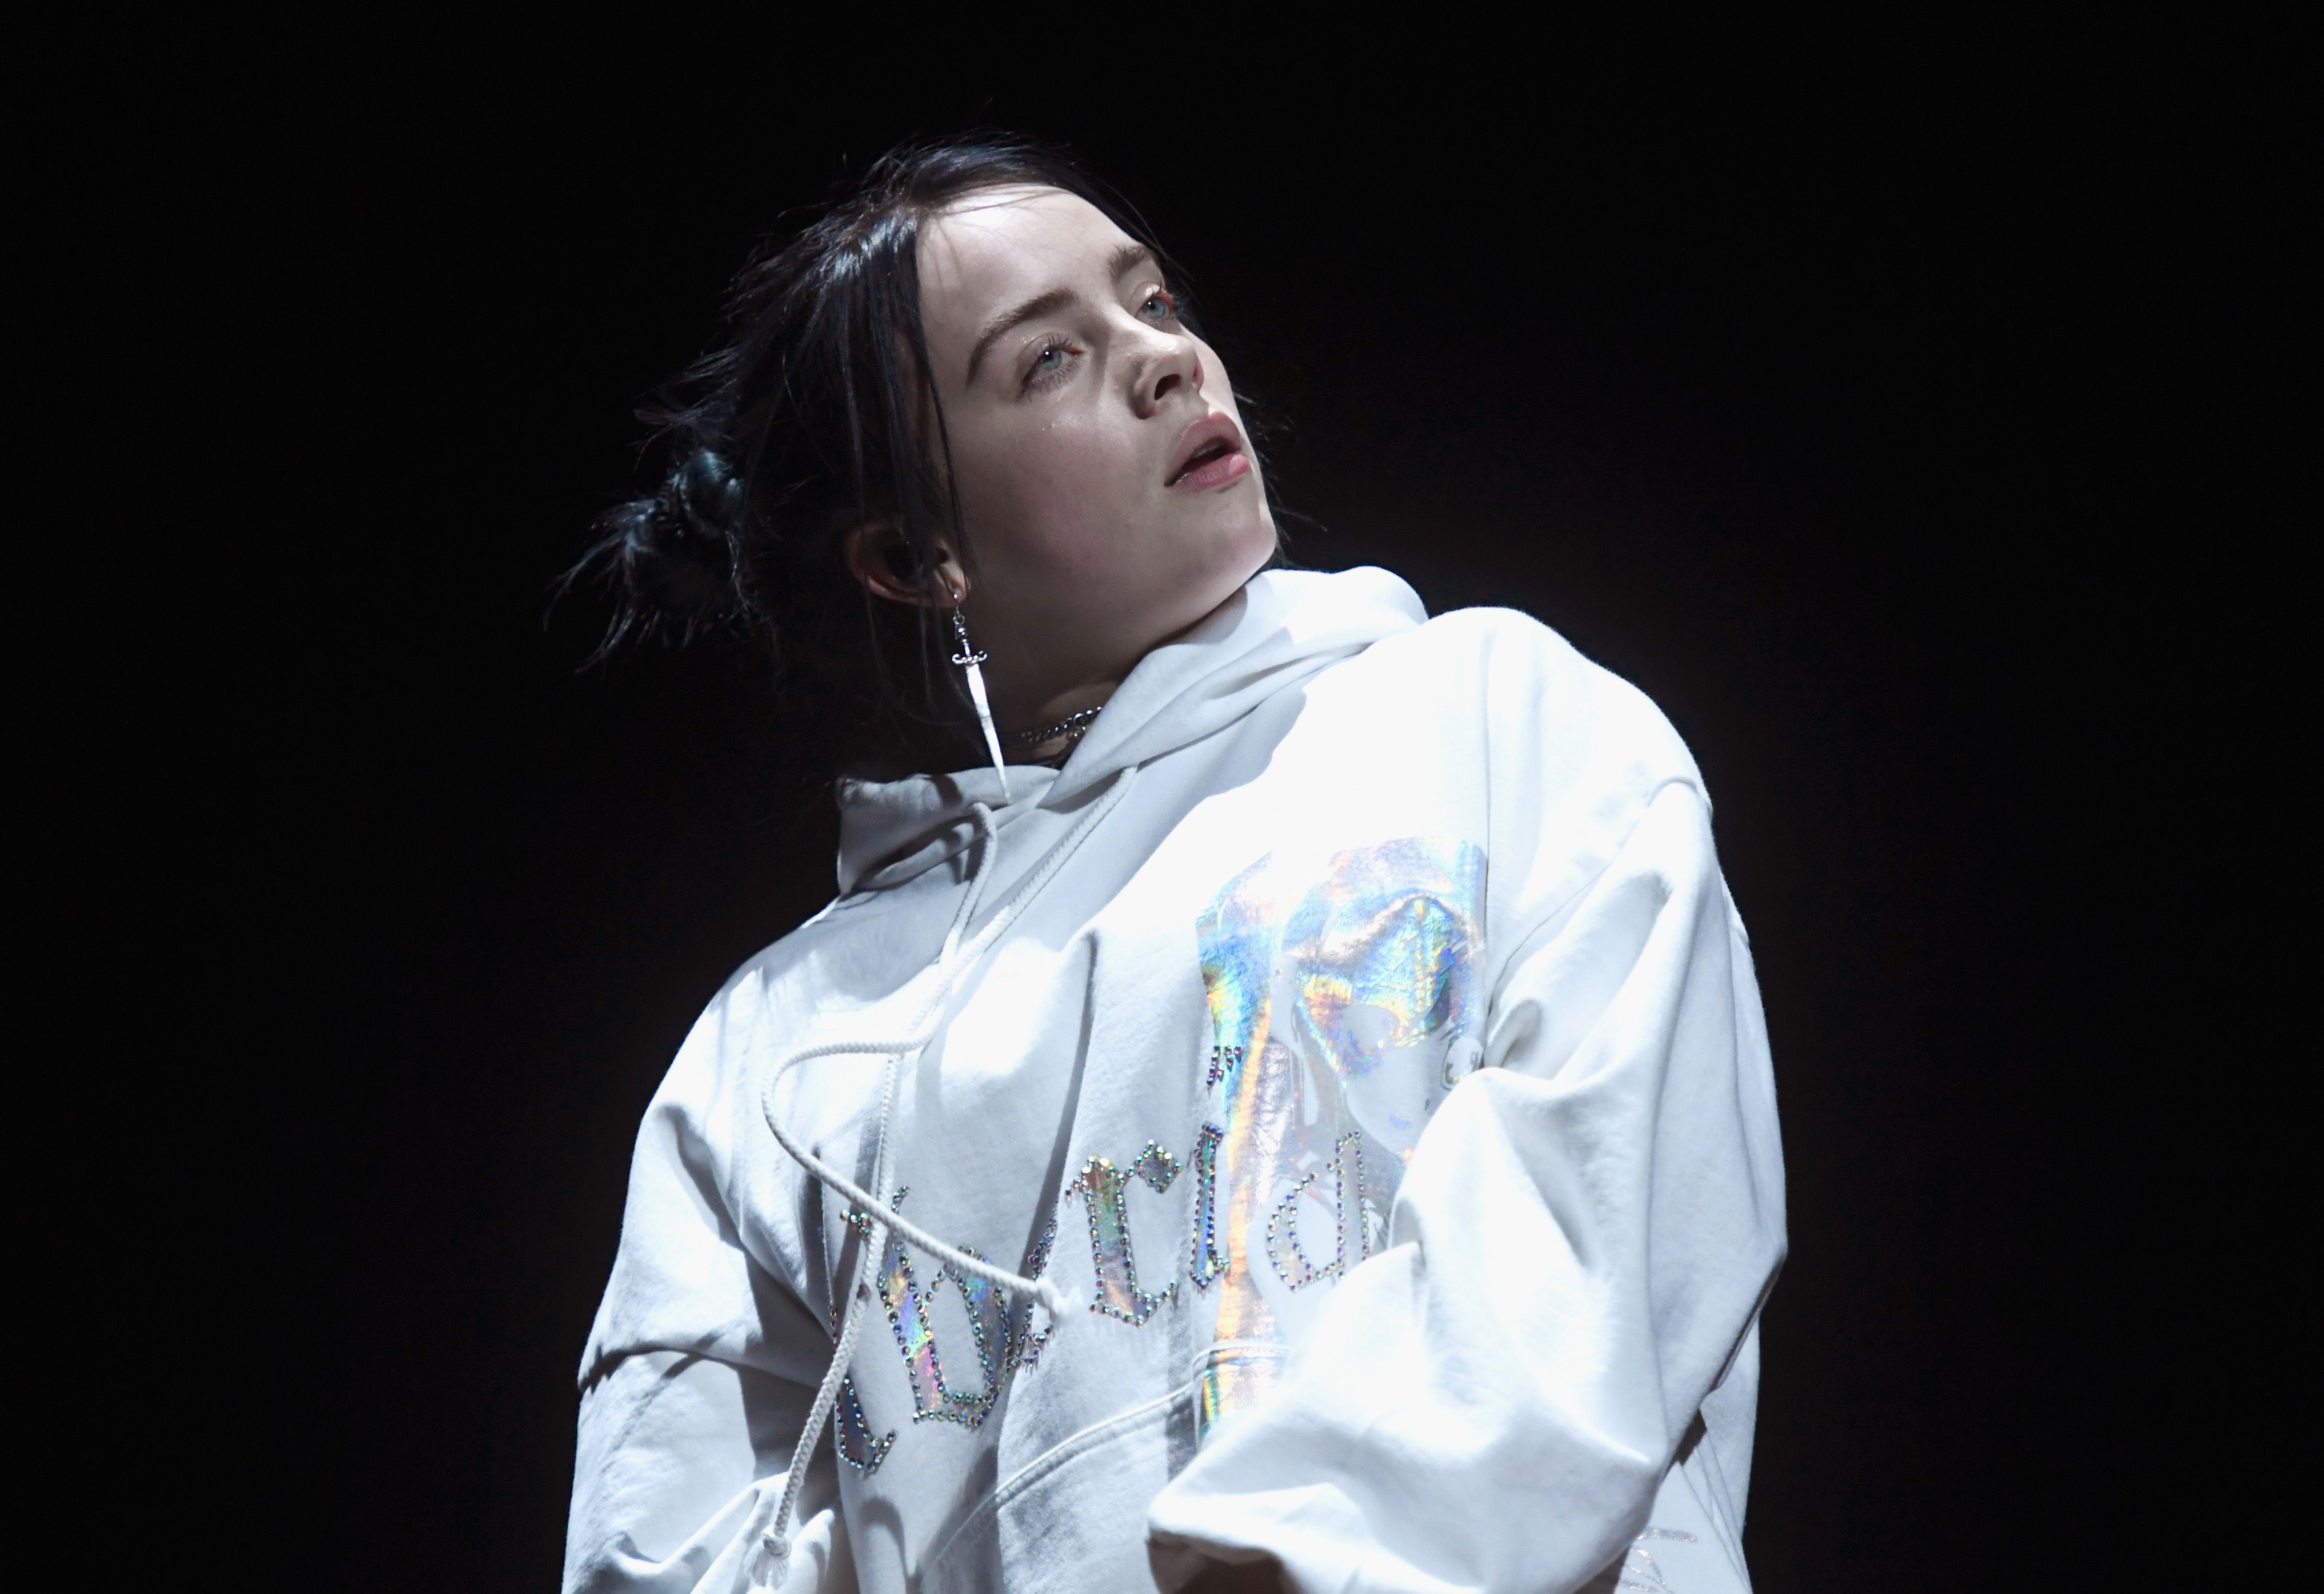 Billie Eilish Said She Wears Baggy Clothes For This Reason